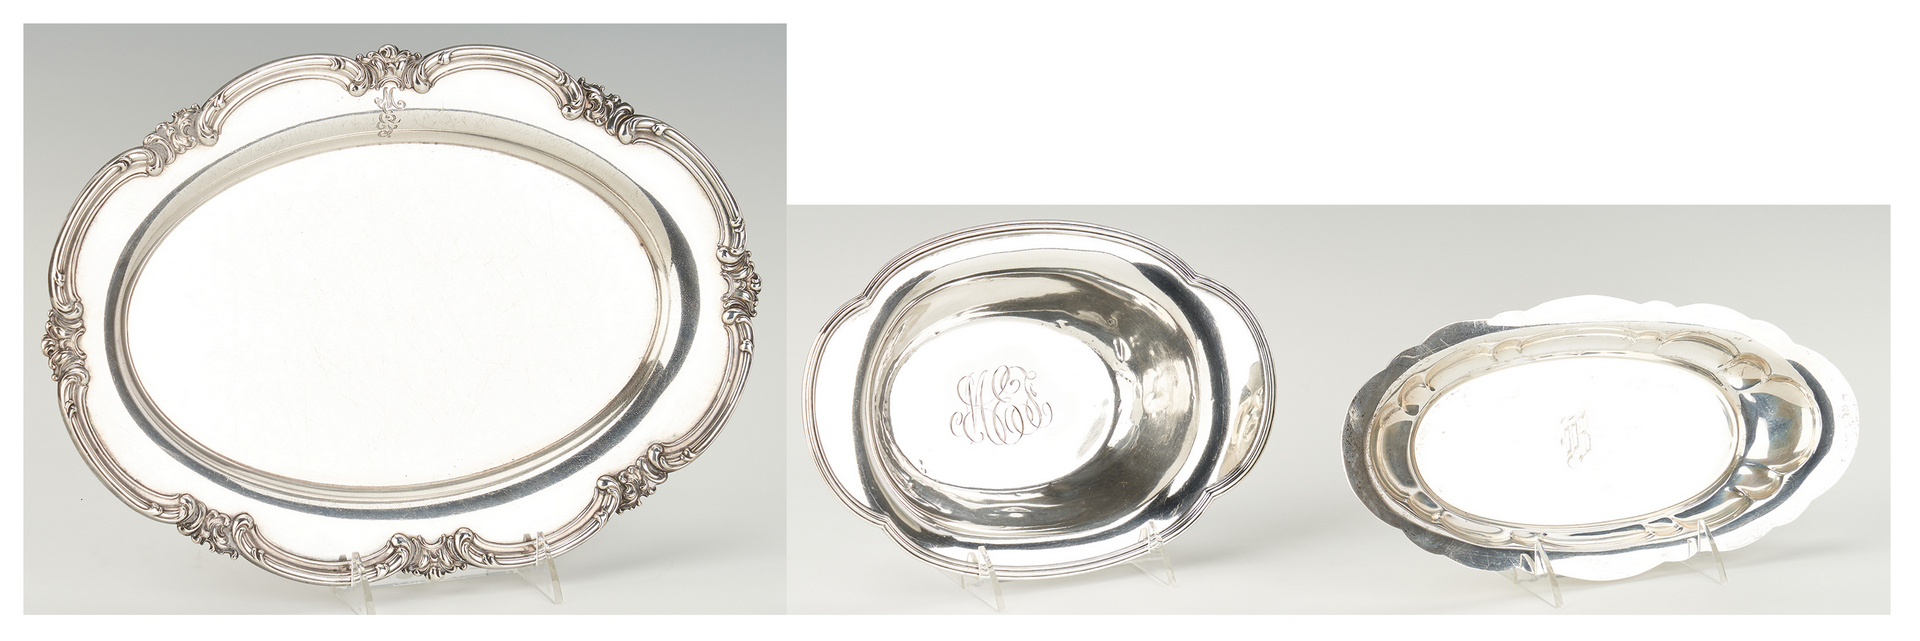 Lot 516: 3 Sterling Item: 2 trays and 1 oval bowl